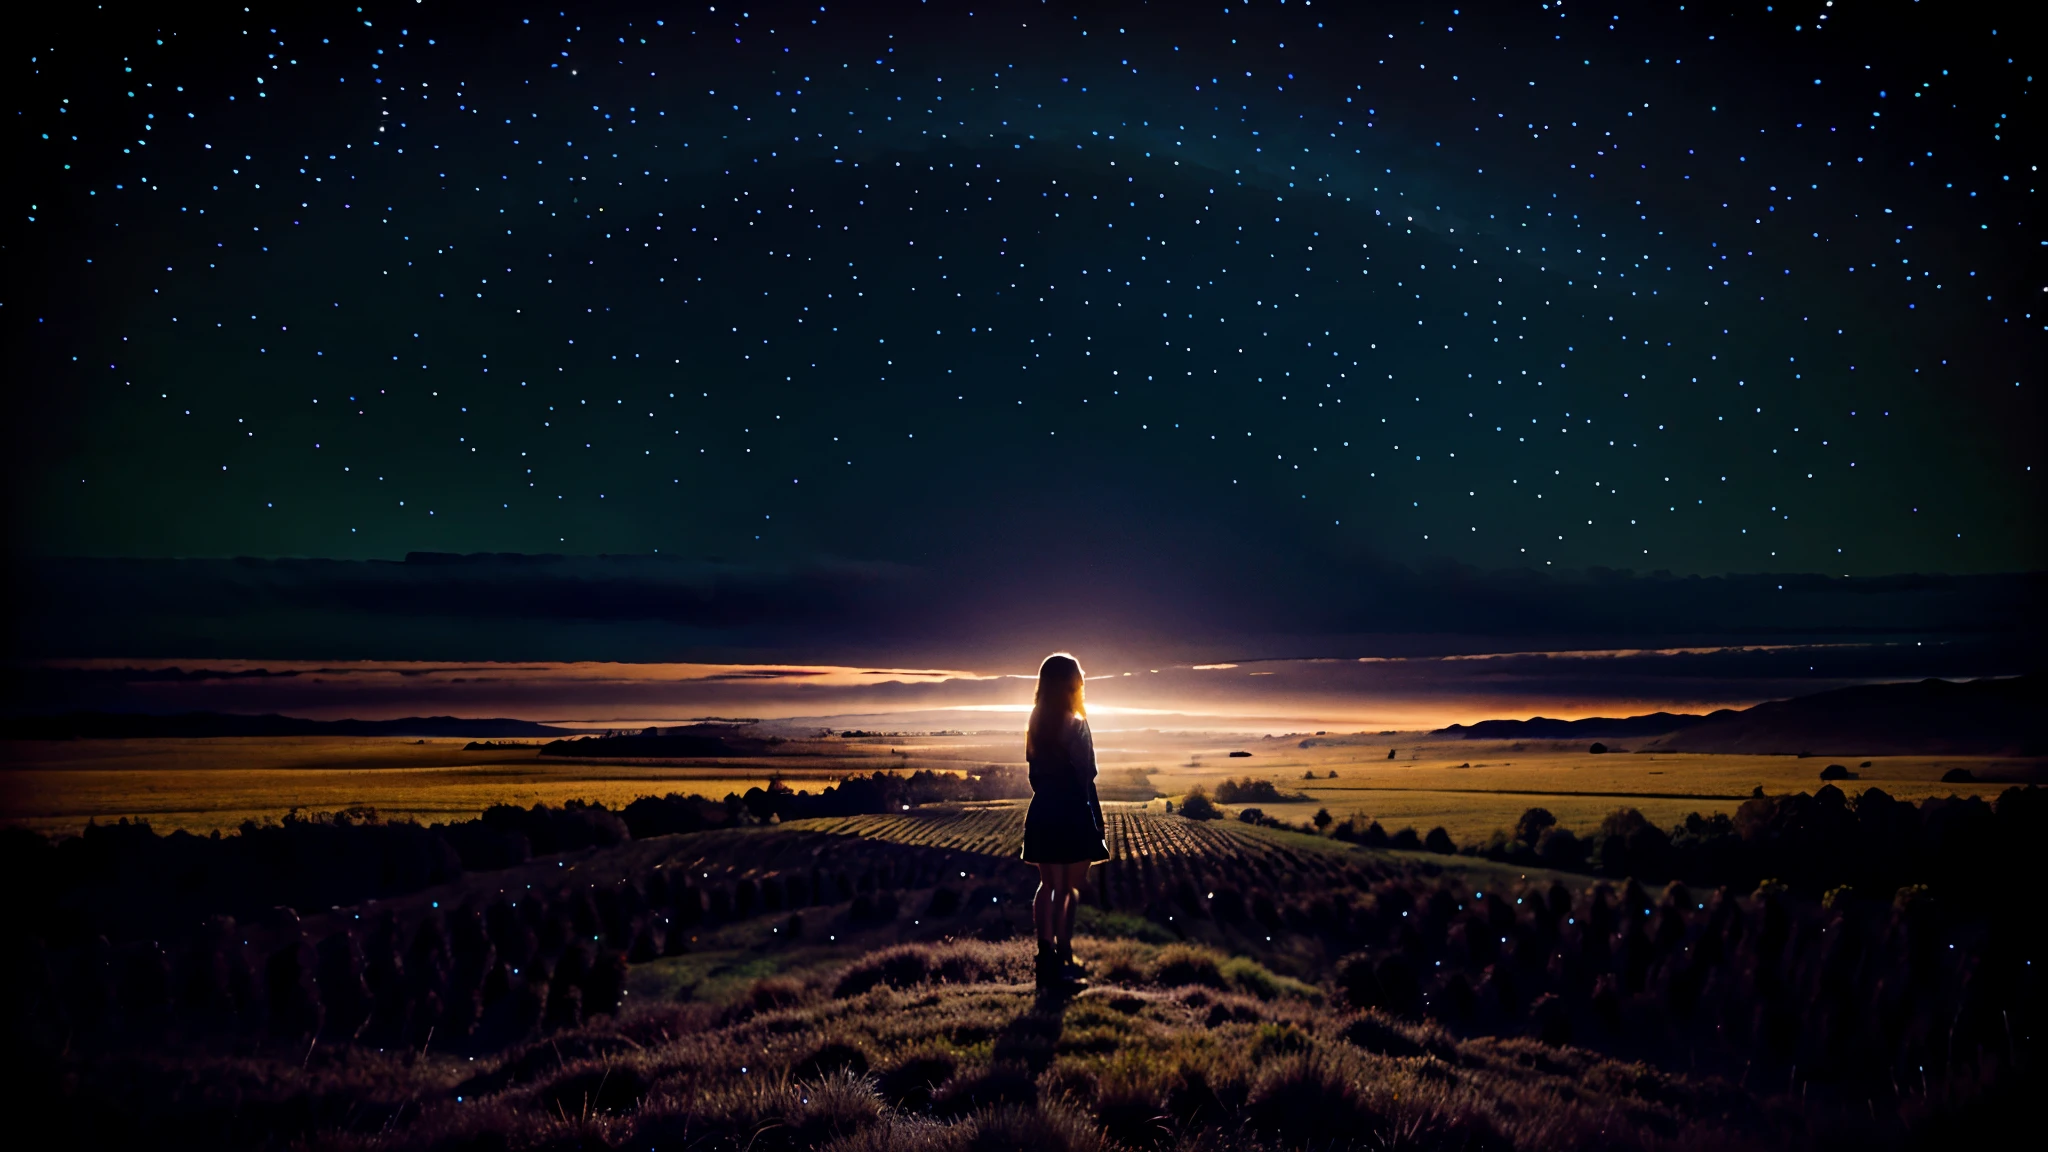 A landscape , with the night sky , open fields, with chill wive , a cute  standing